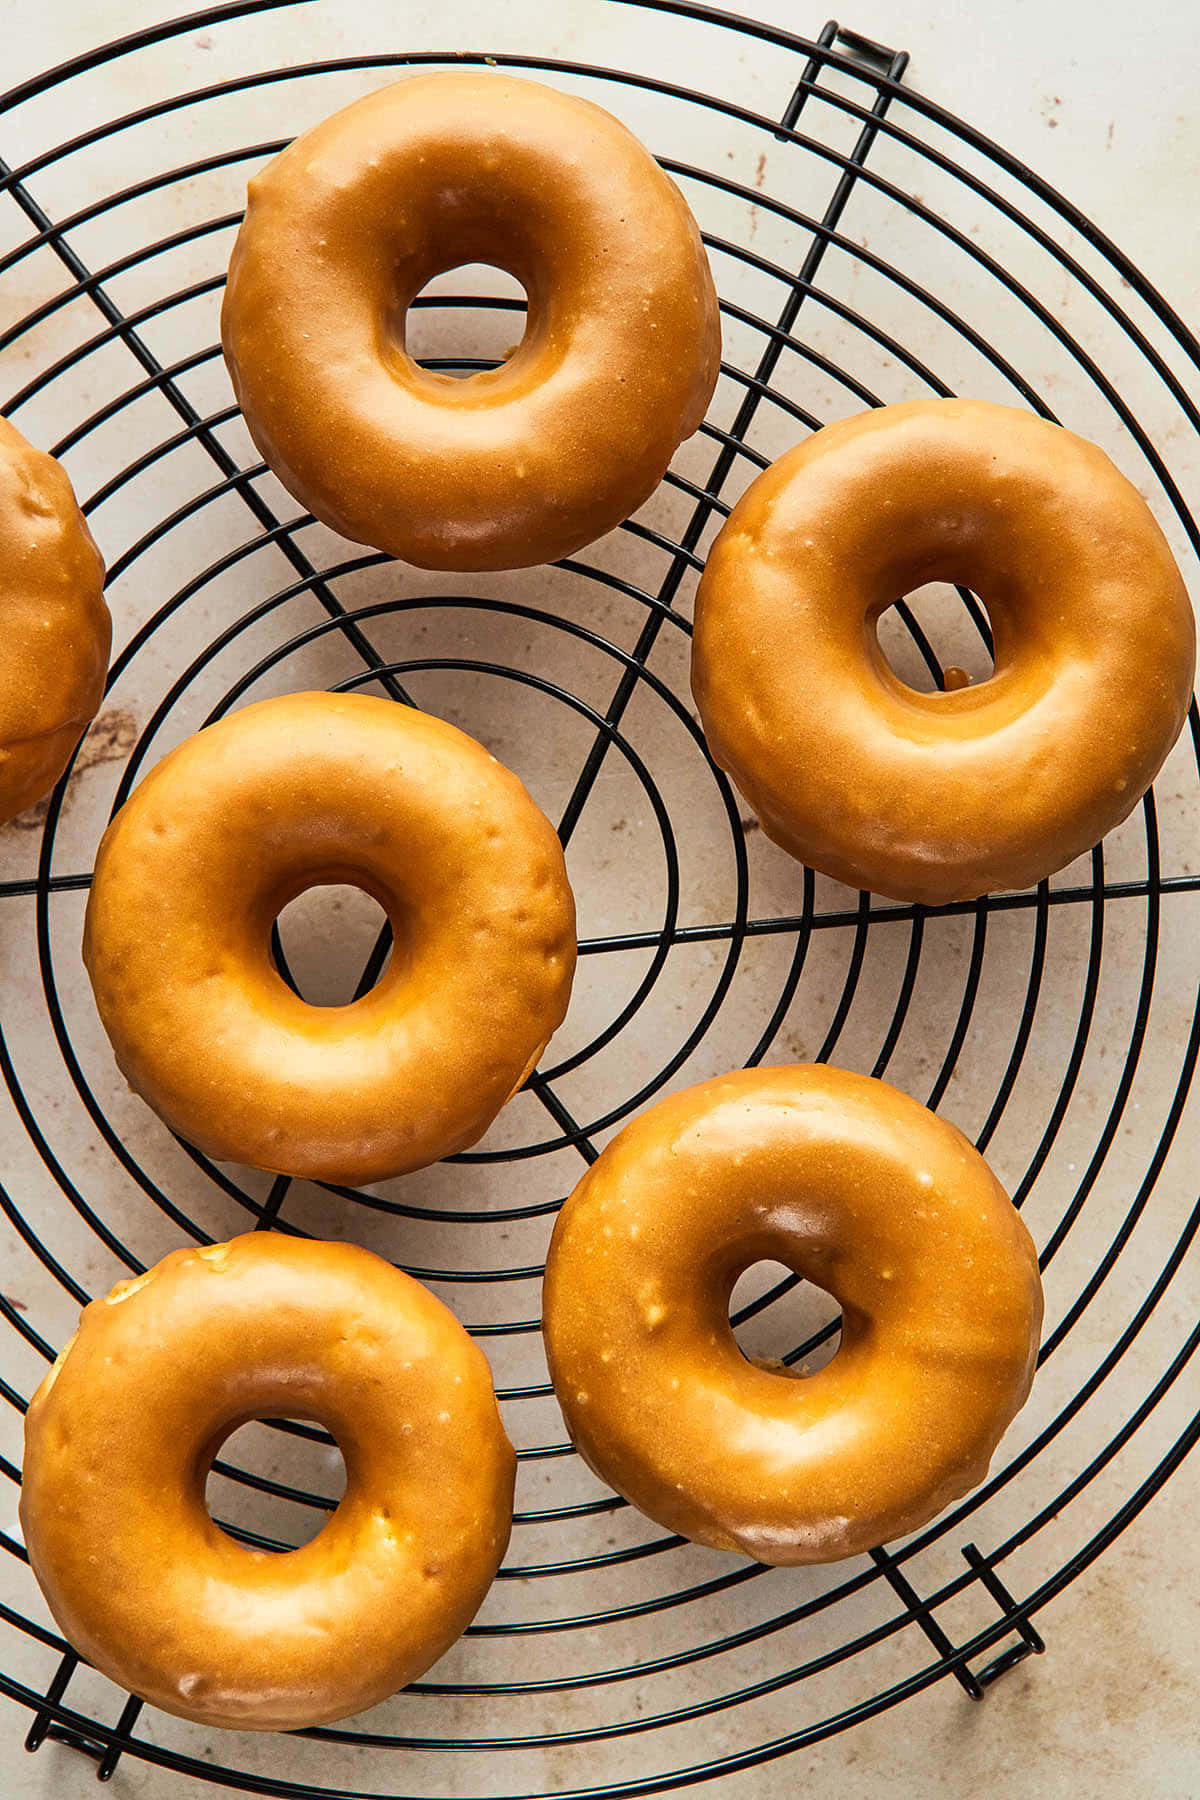 Delicious Glazed Donuts to Start Your Day Wallpaper